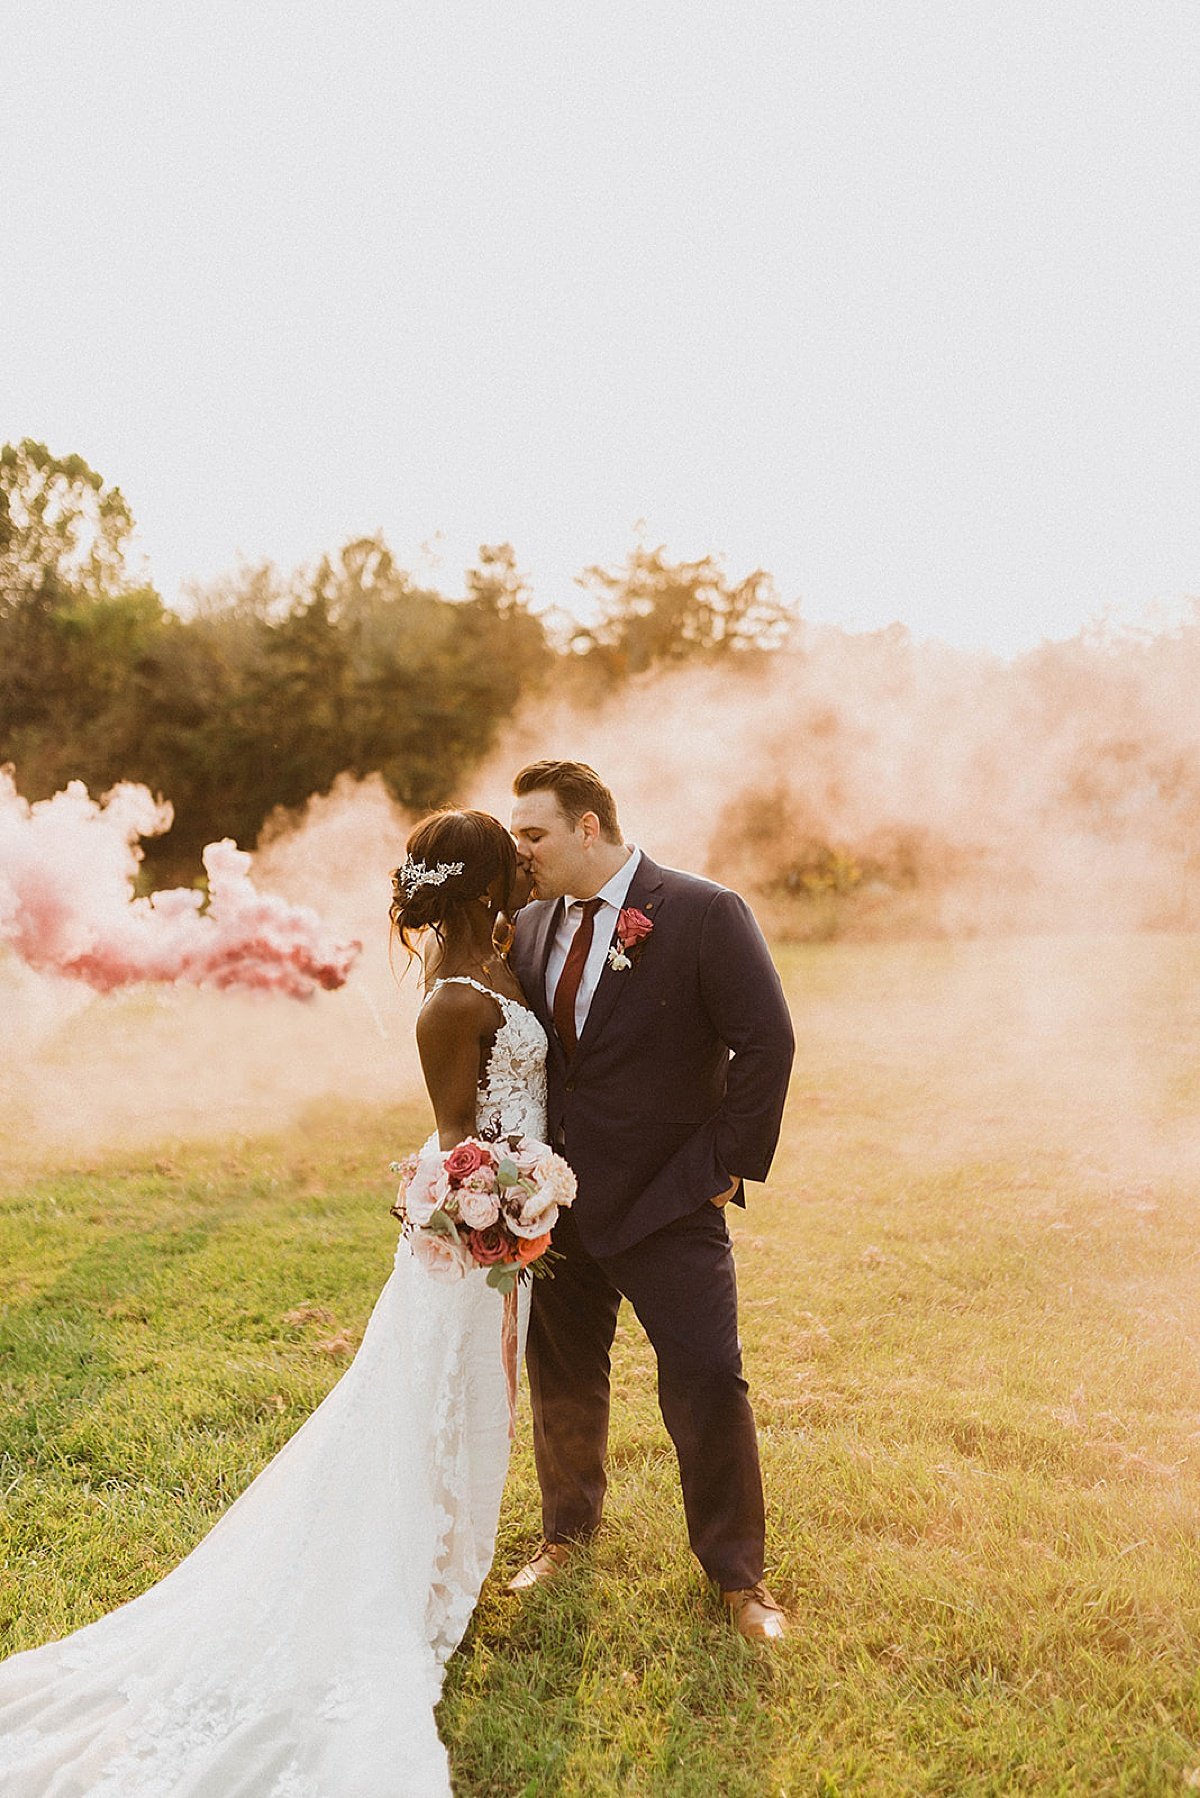  Bride and groom kiss surrounded by colorful smoke in outdoor wedding shot by Theresa mcdonald 